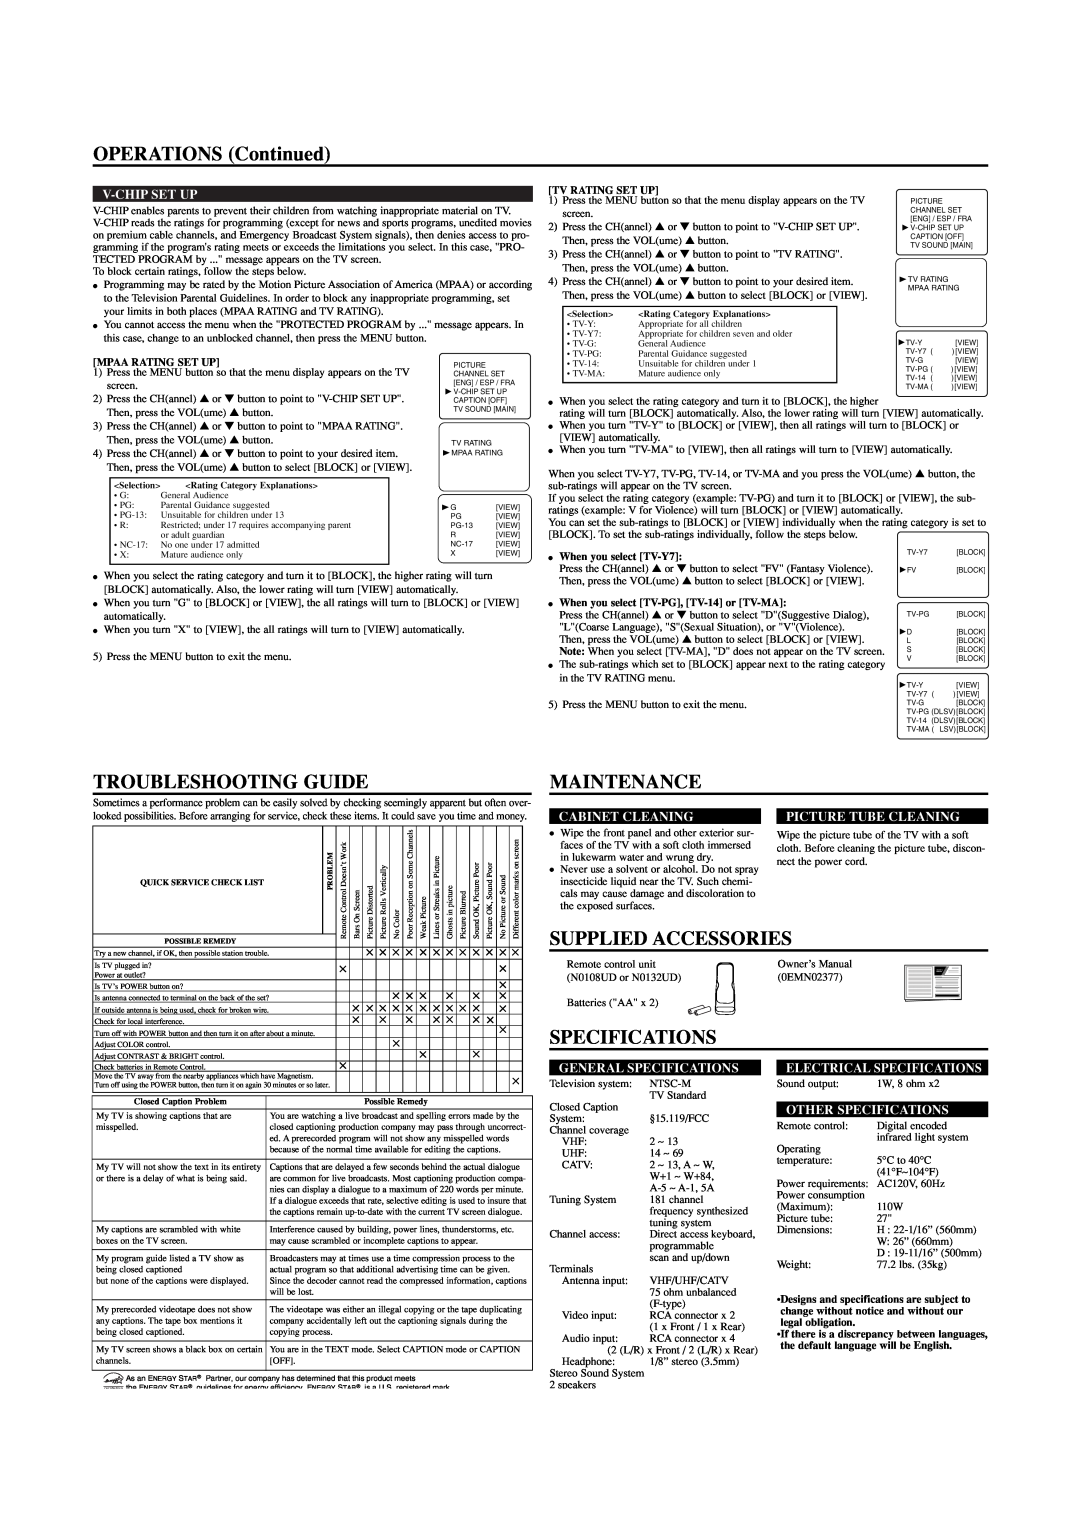 Sylvania 6427TE owner manual OPERATIONS Continued, Troubleshooting Guide, Maintenance, Supplied Accessories, Specifications 